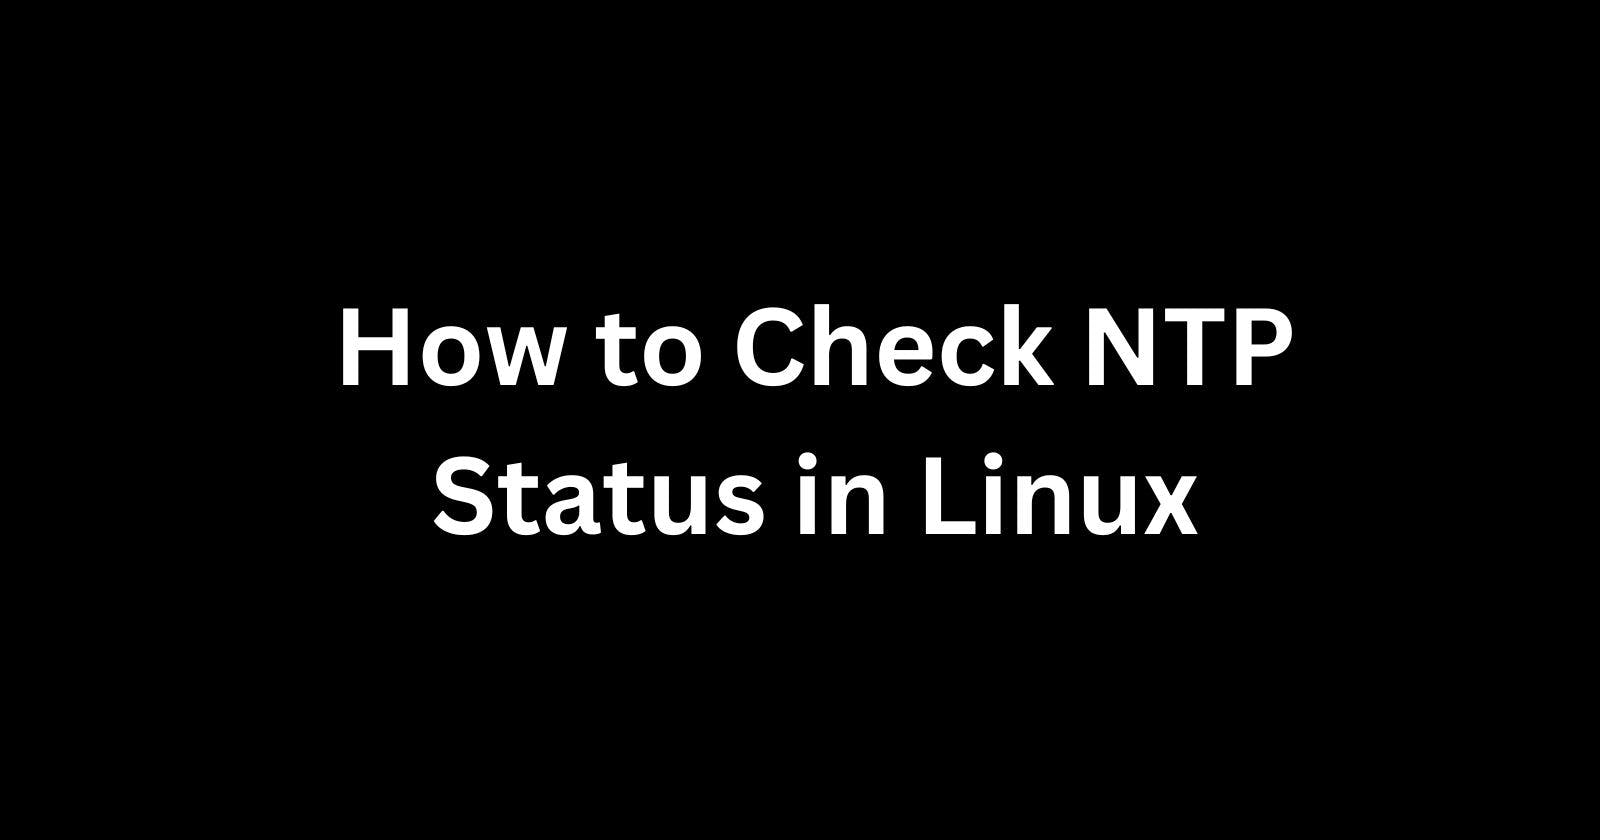 How to Check NTP Status in Linux